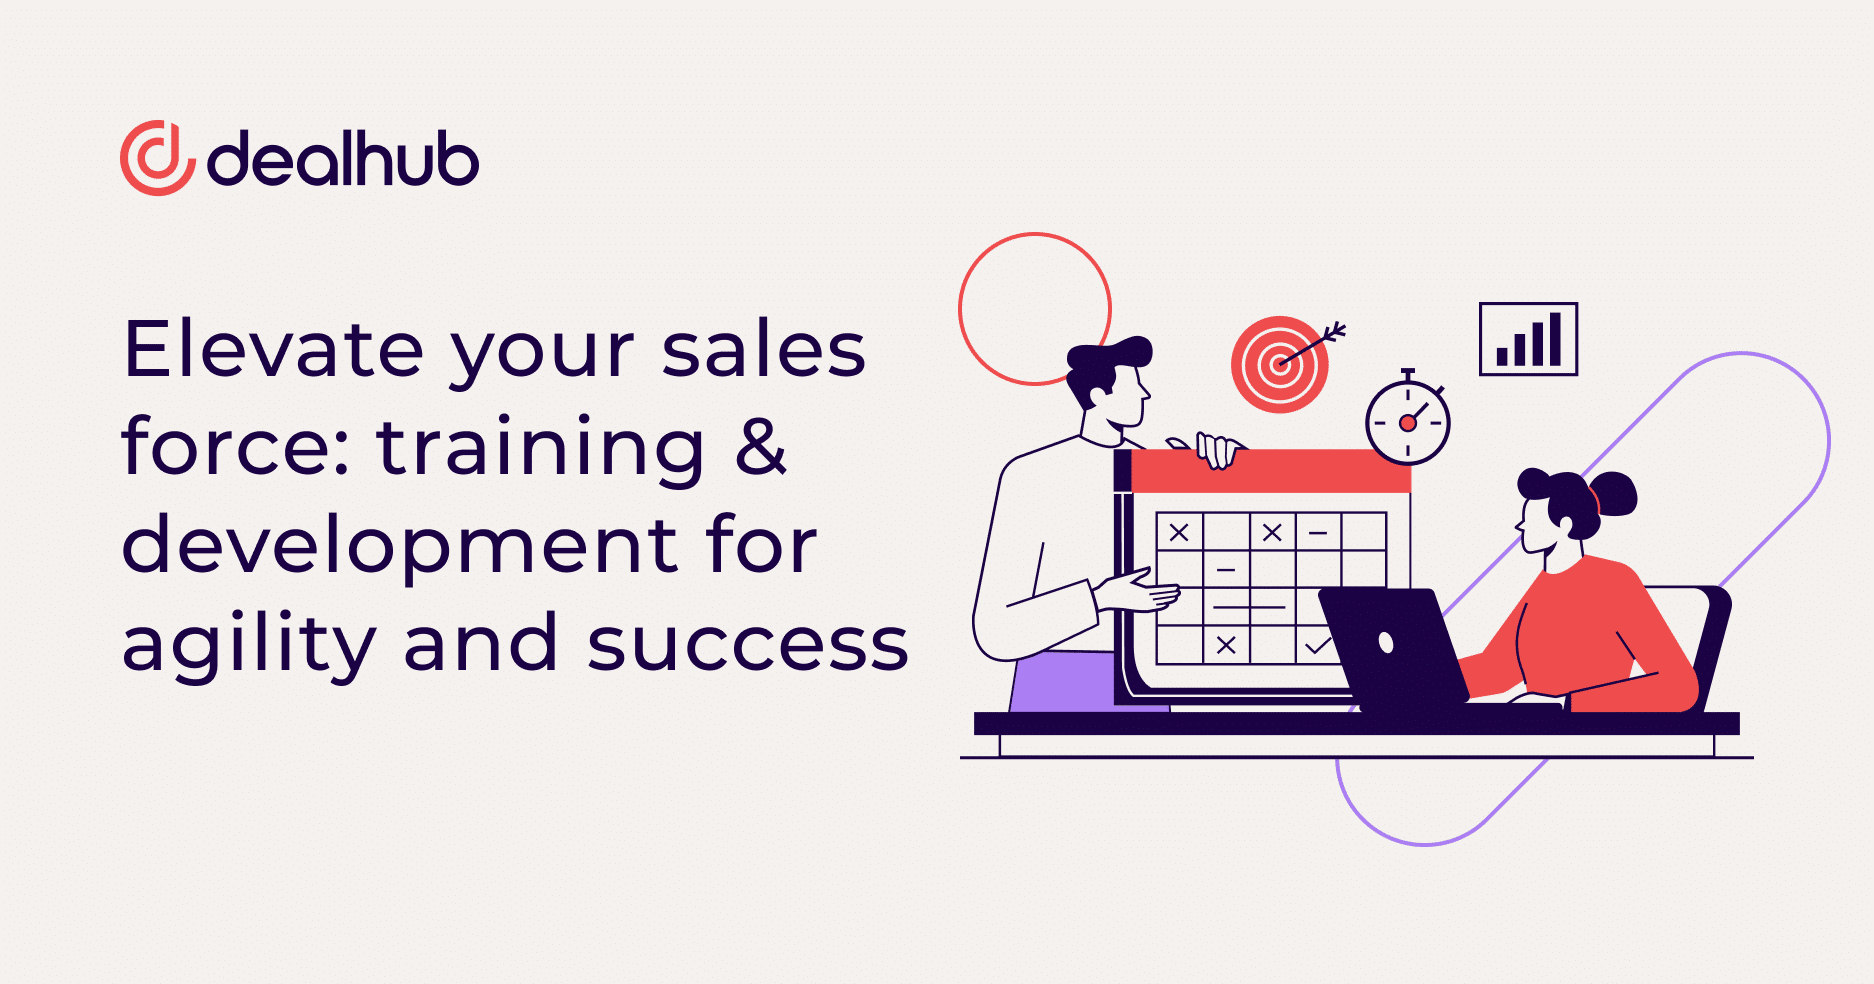 Elevate your sales force: training & development for agility and success